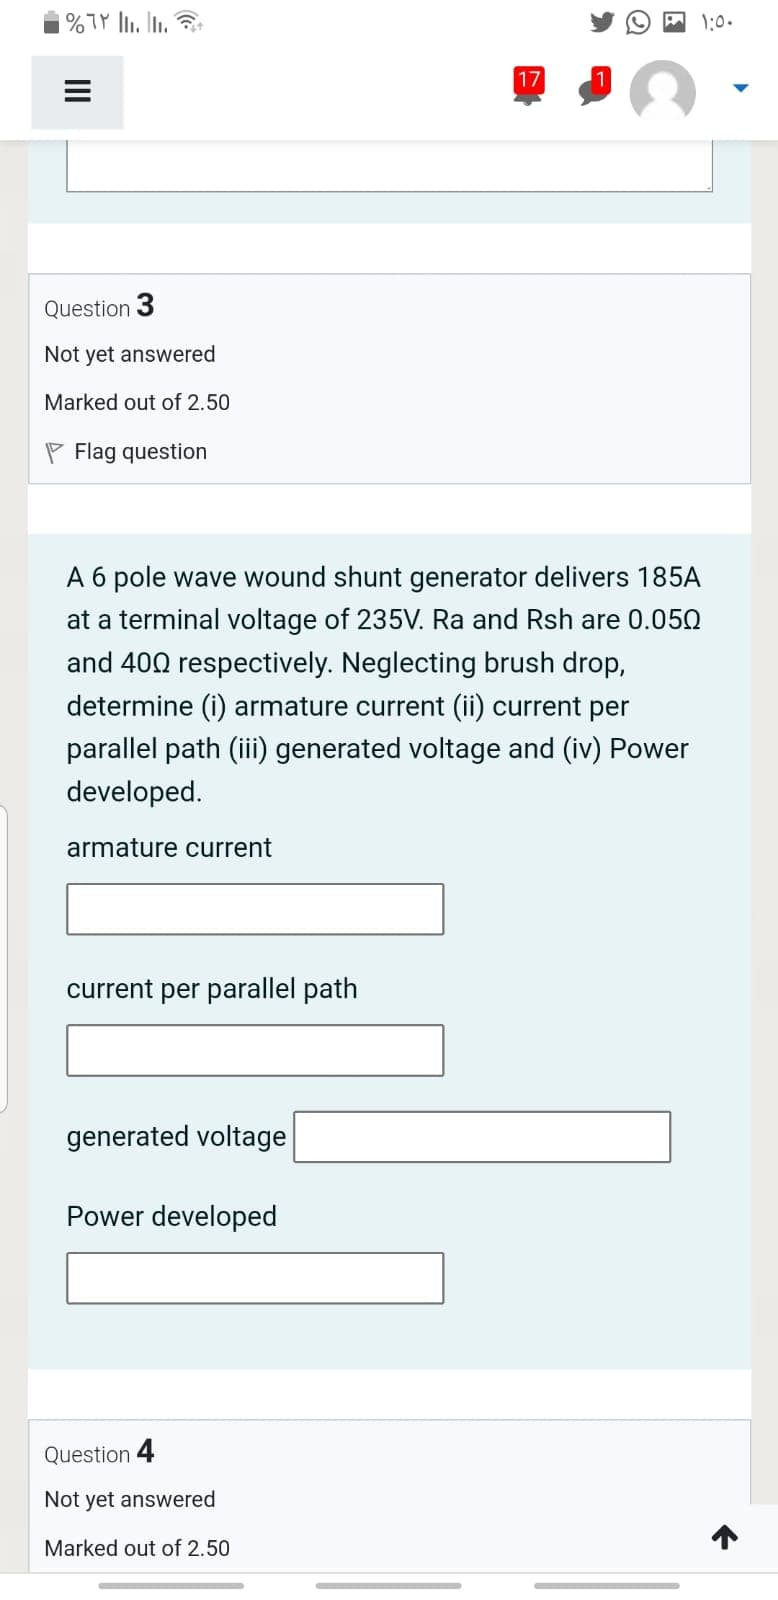 A 1:0.
17
Question 3
Not yet answered
Marked out of 2.50
P Flag question
A 6 pole wave wound shunt generator delivers 185A
at a terminal voltage of 235V. Ra and Rsh are 0.050
and 400 respectively. Neglecting brush drop,
determine (i) armature current (ii) current per
parallel path (iii) generated voltage and (iv) Power
developed.
armature current
current per parallel path
generated voltage
Power developed
Question 4
Not yet answered
Marked out of 2.50
II
